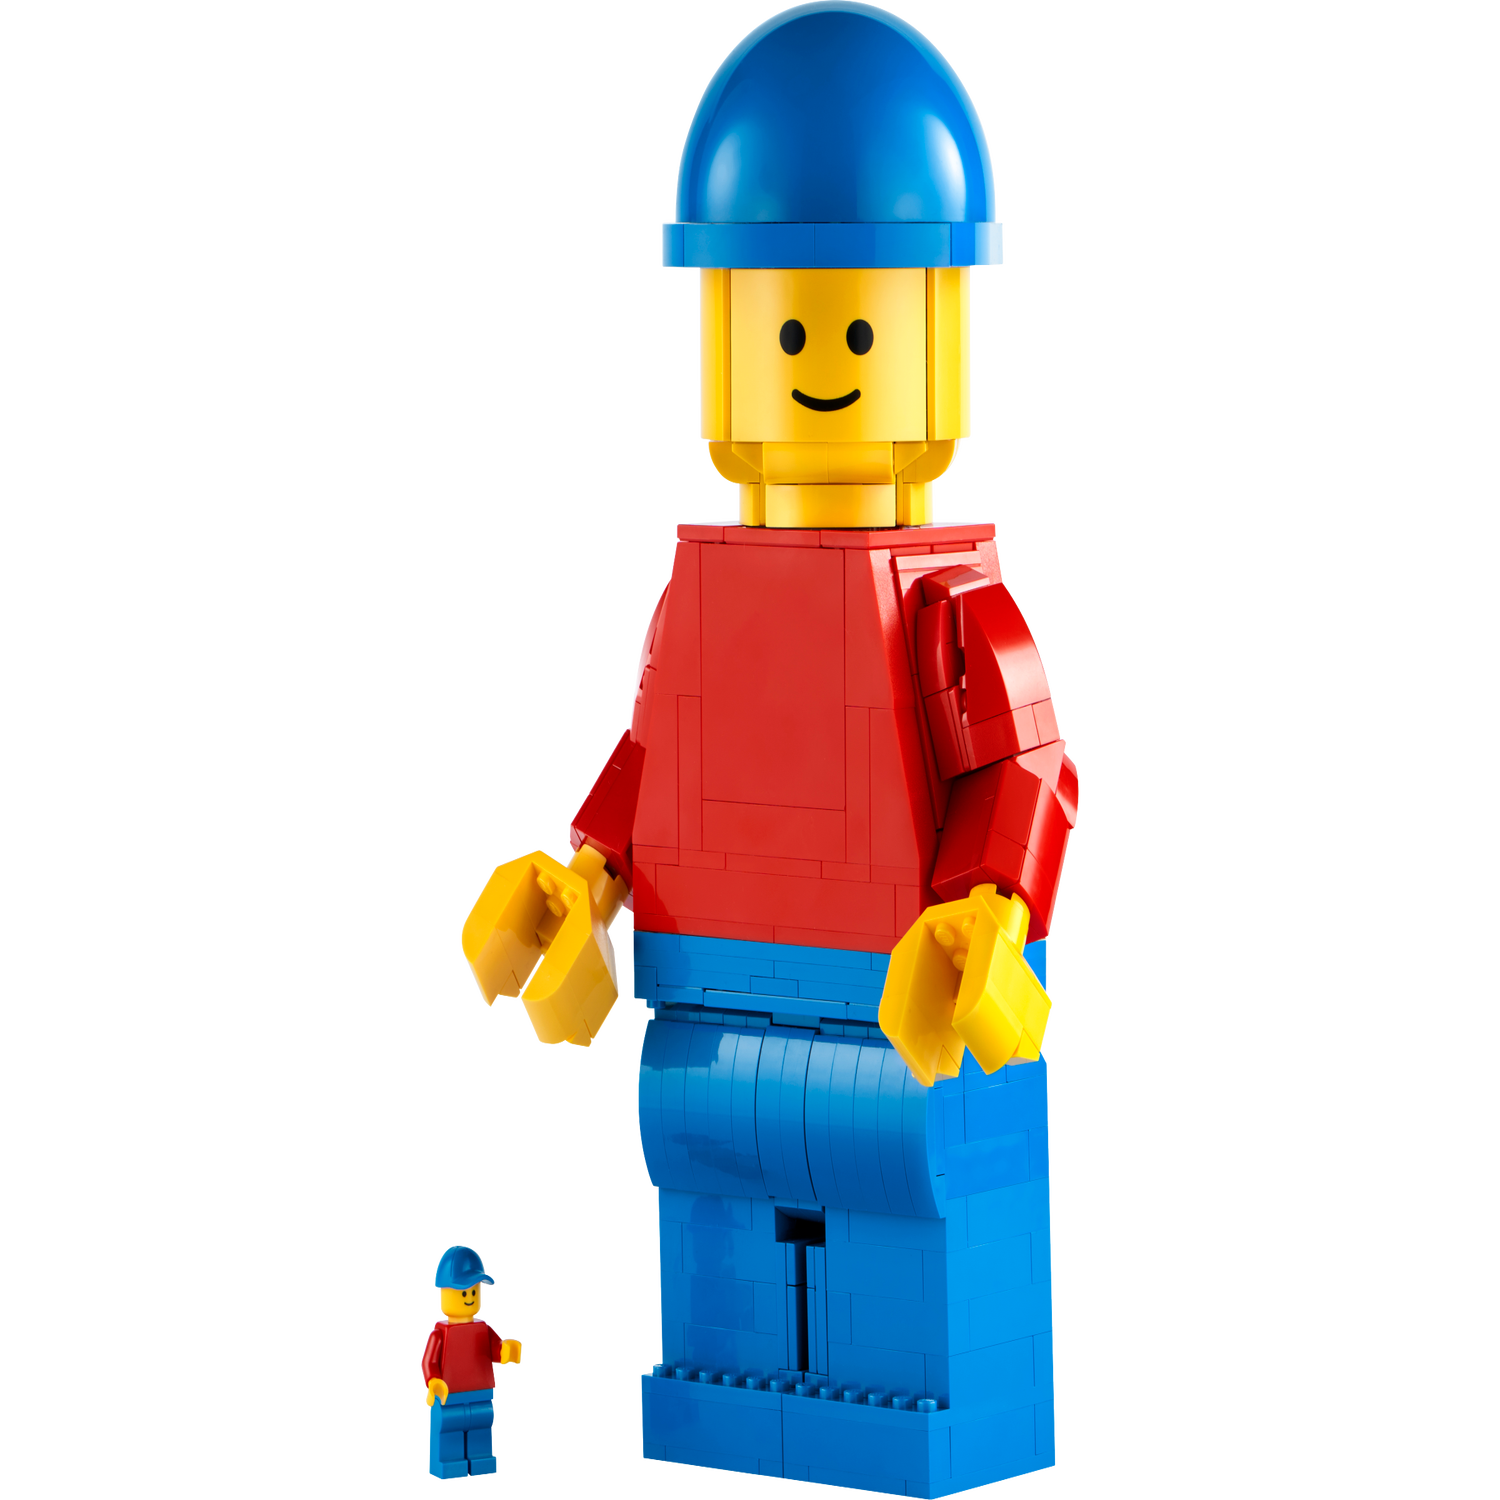 up-scaled-lego-minifigure-40649-minifigures-buy-online-at-the